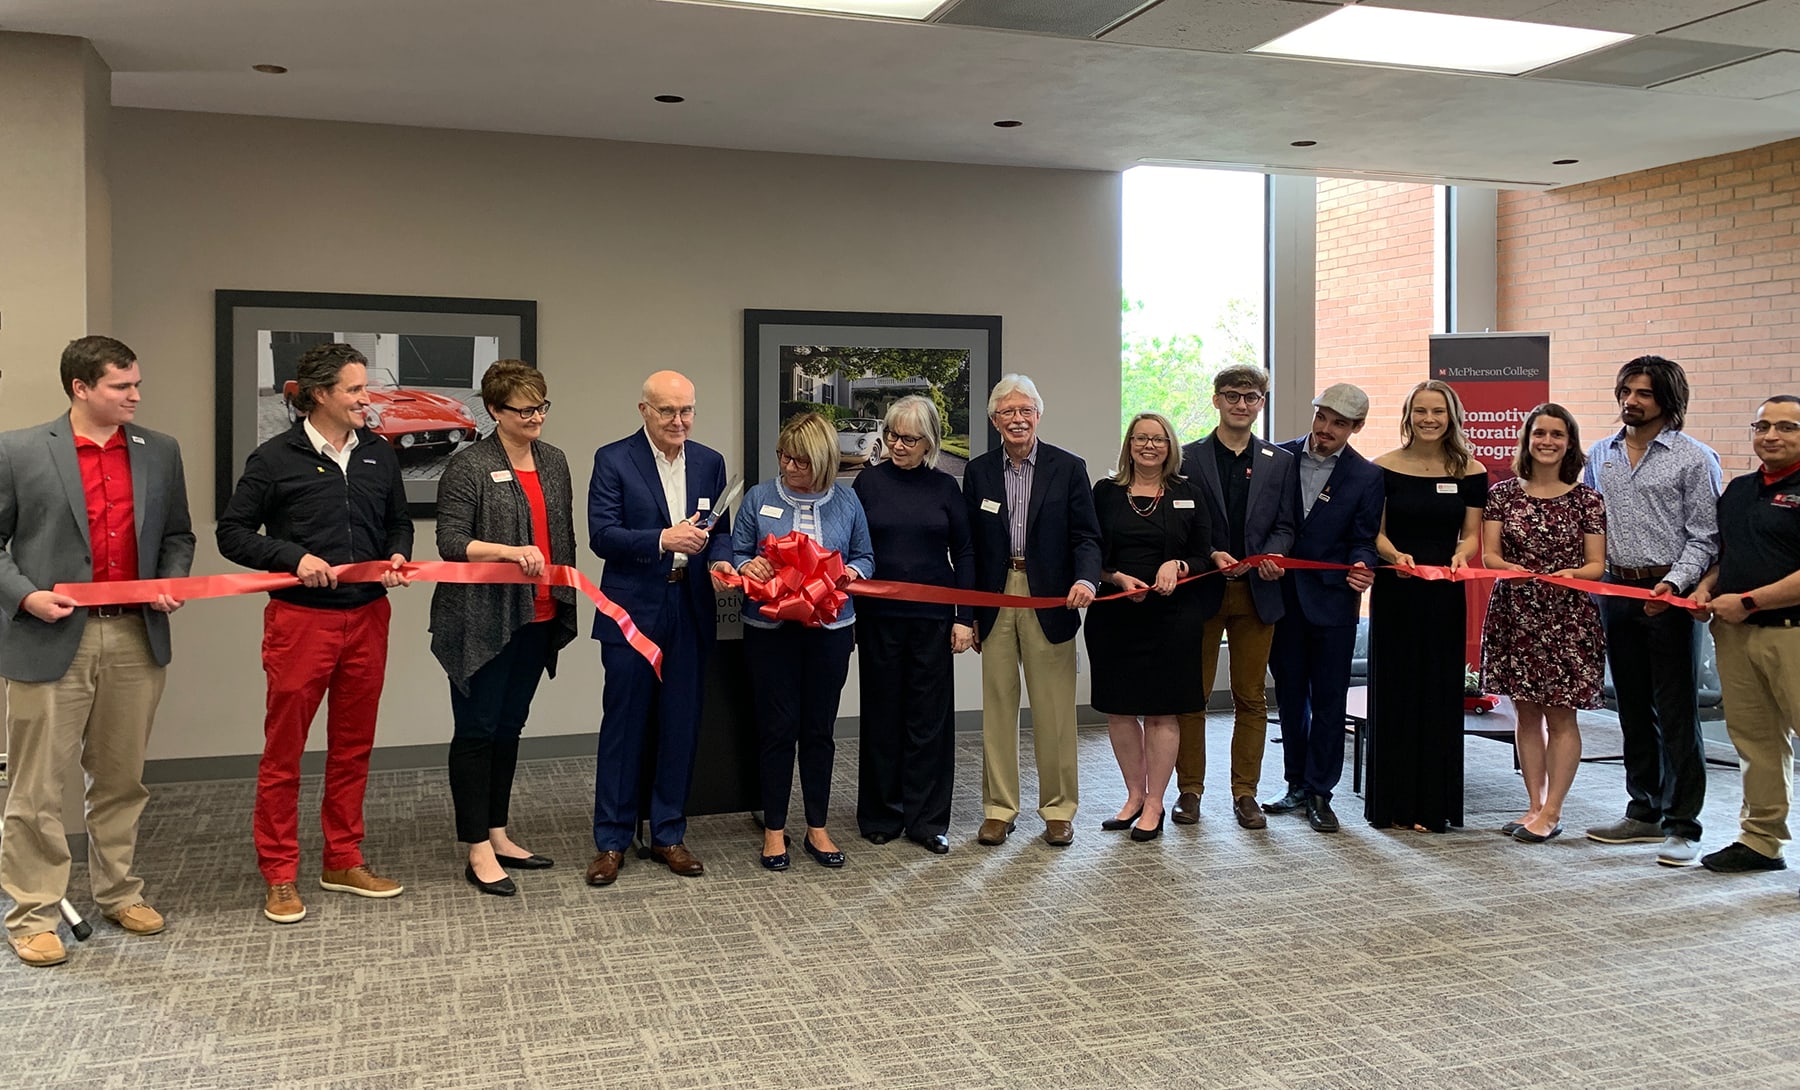 McPherson College Automotive Restoration Dedicates New Research Center On Campus In Honor Of Classic Car Restoration Expert Paul Russell And Company